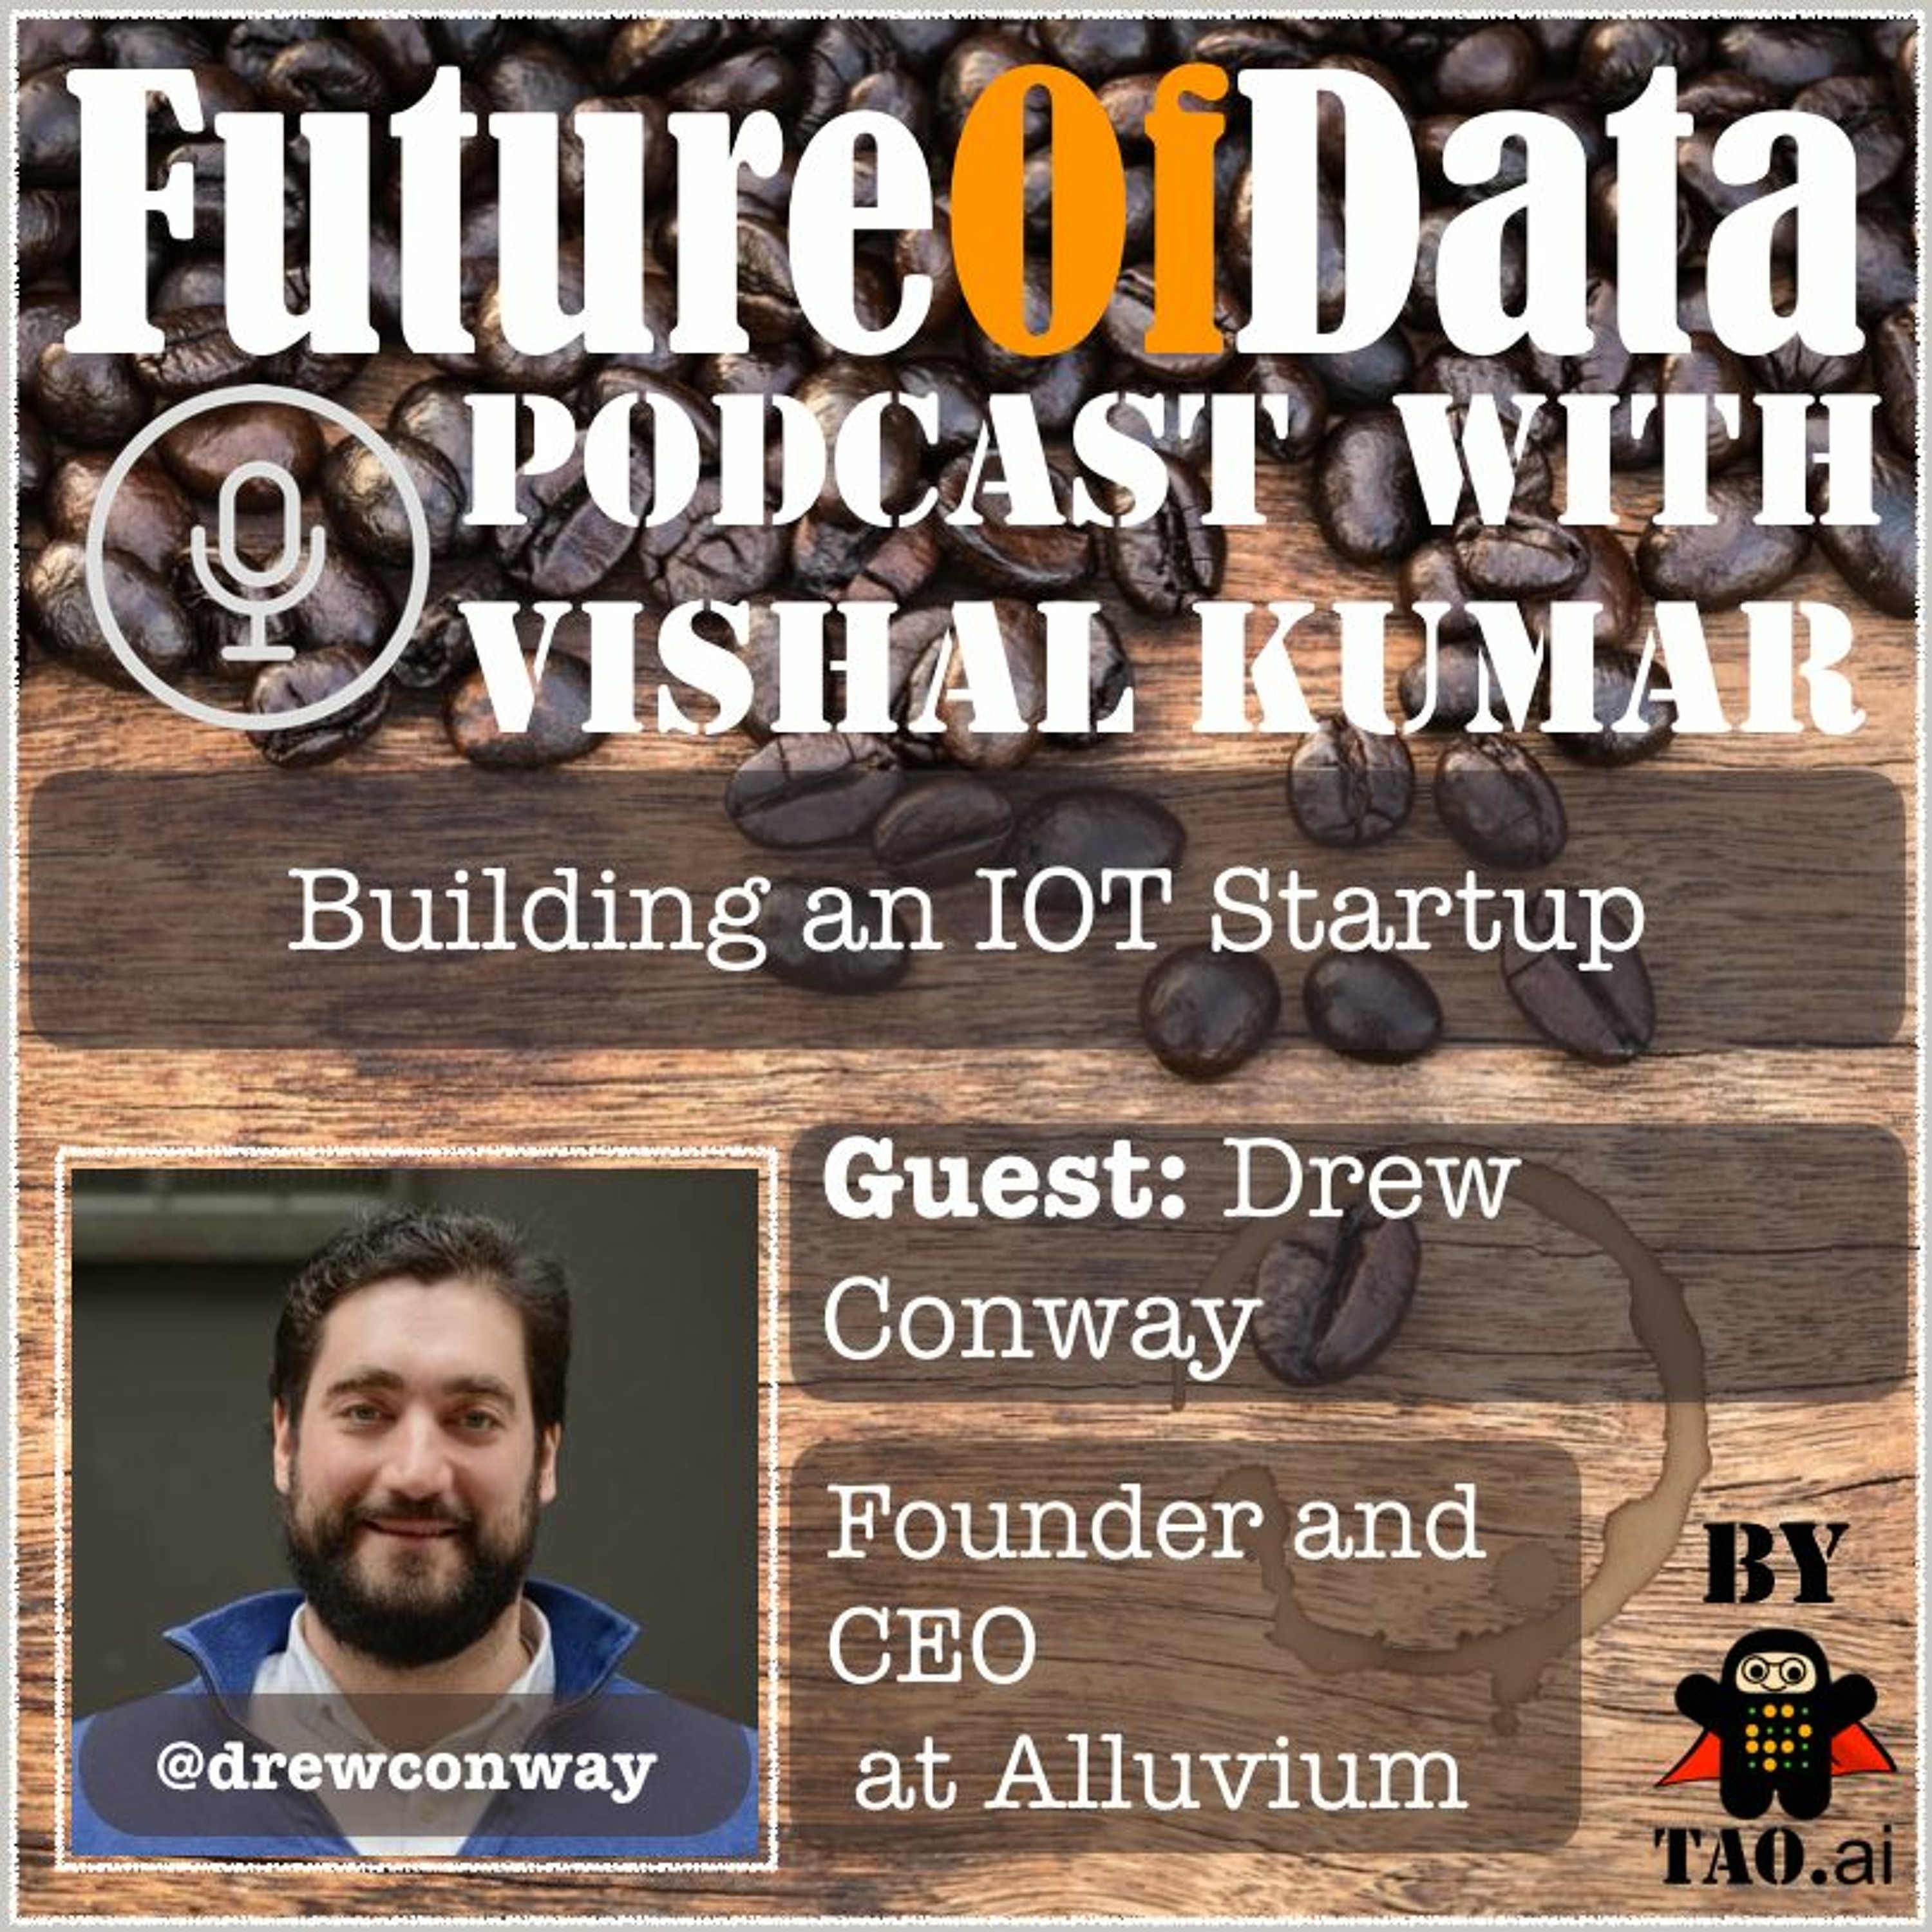 @DrewConway on fabric of an IOT Startup #FutureOfData #Podcast